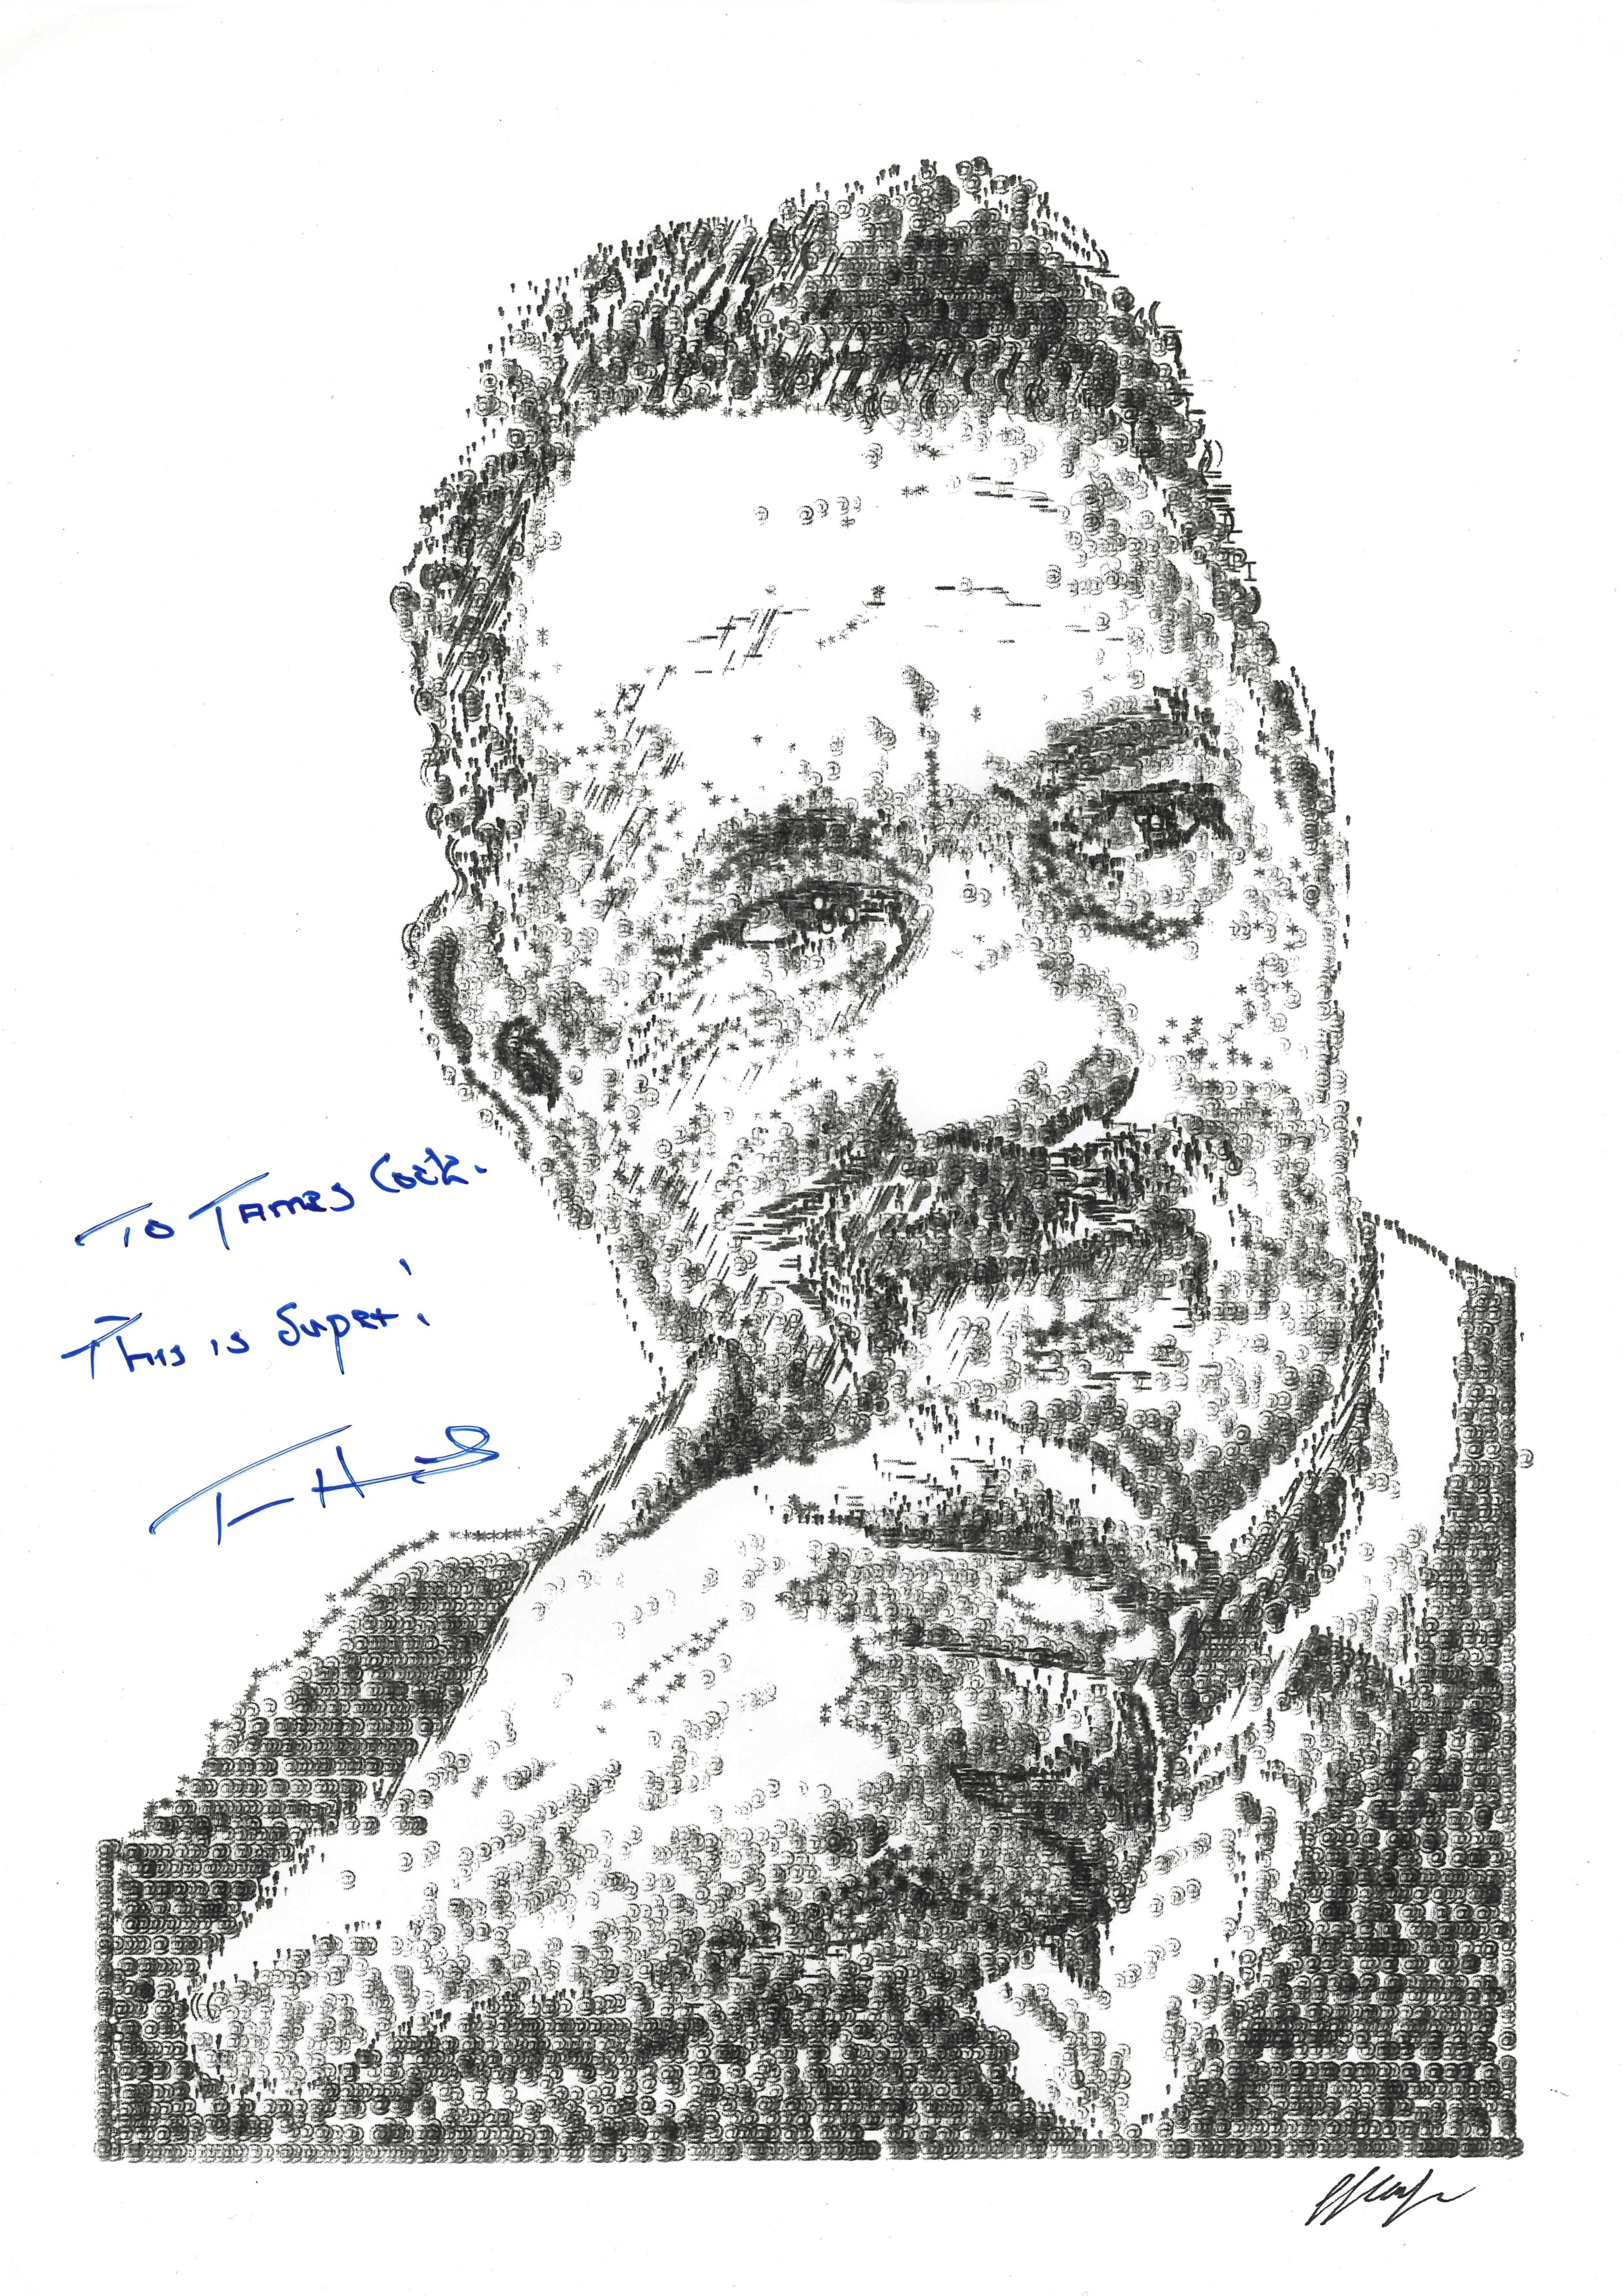 Tom Hanks signed the artwork with a handwritten message that read: "To James Cook. This is super! Tom Hanks".